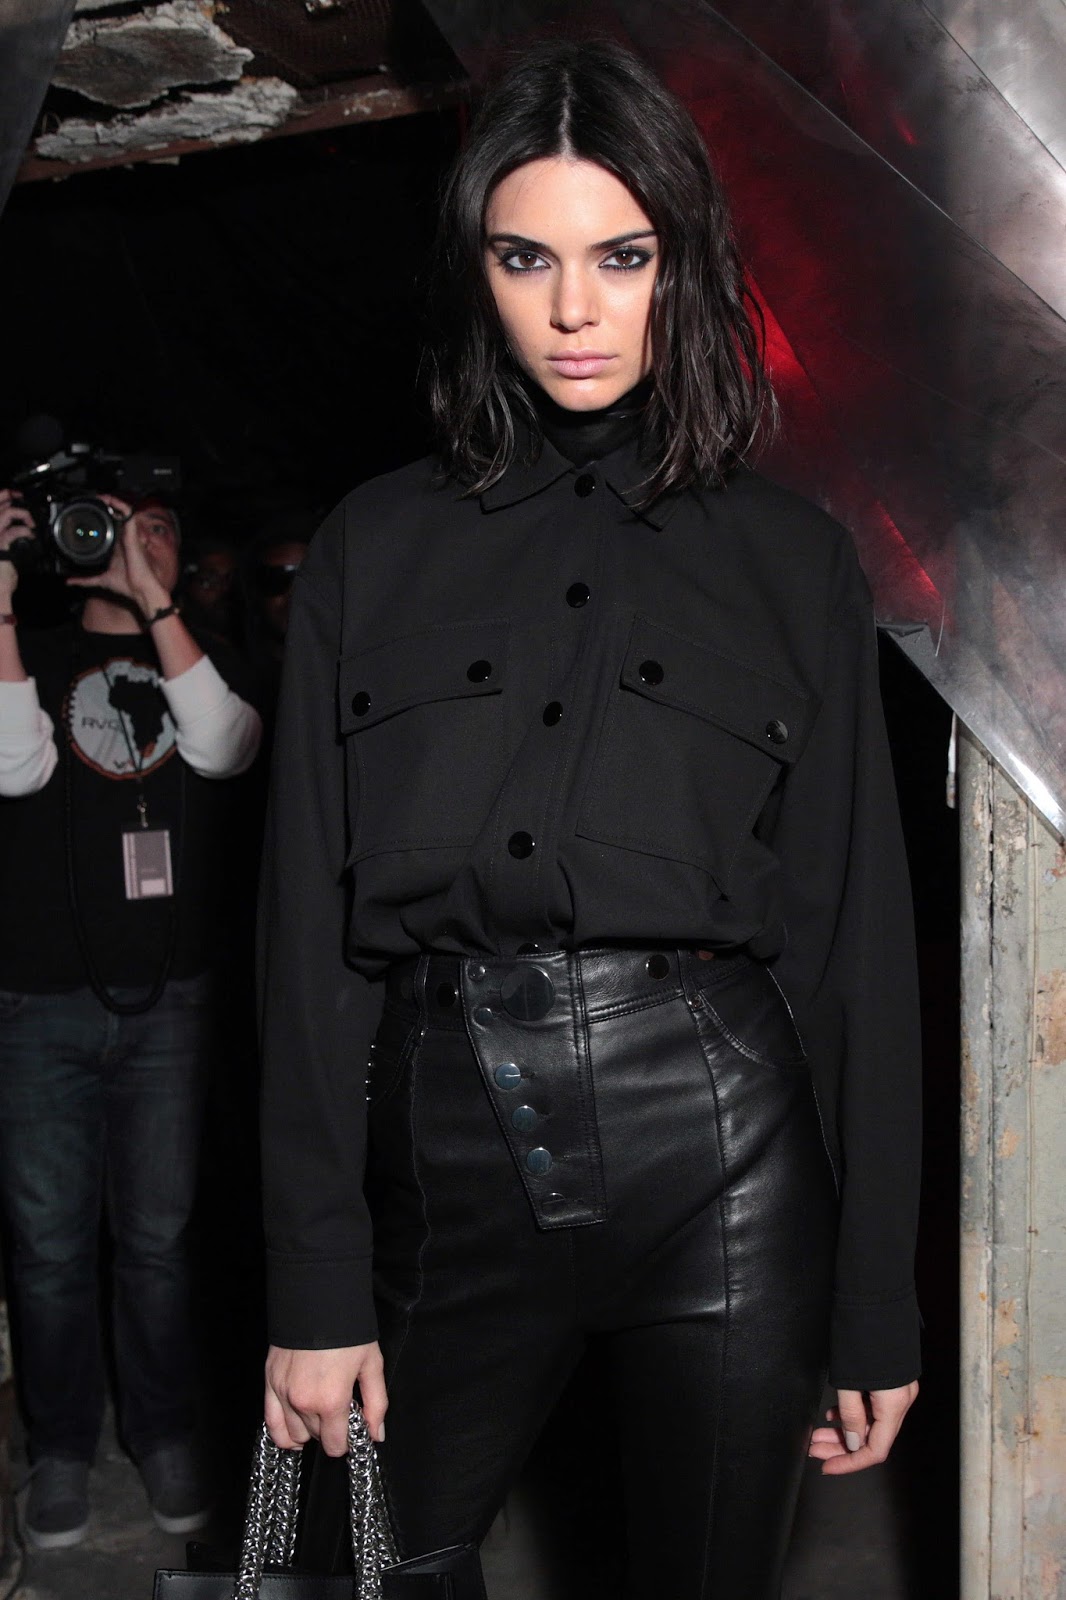 Lovely Ladies in Leather: Kendall Jenner in leather pants